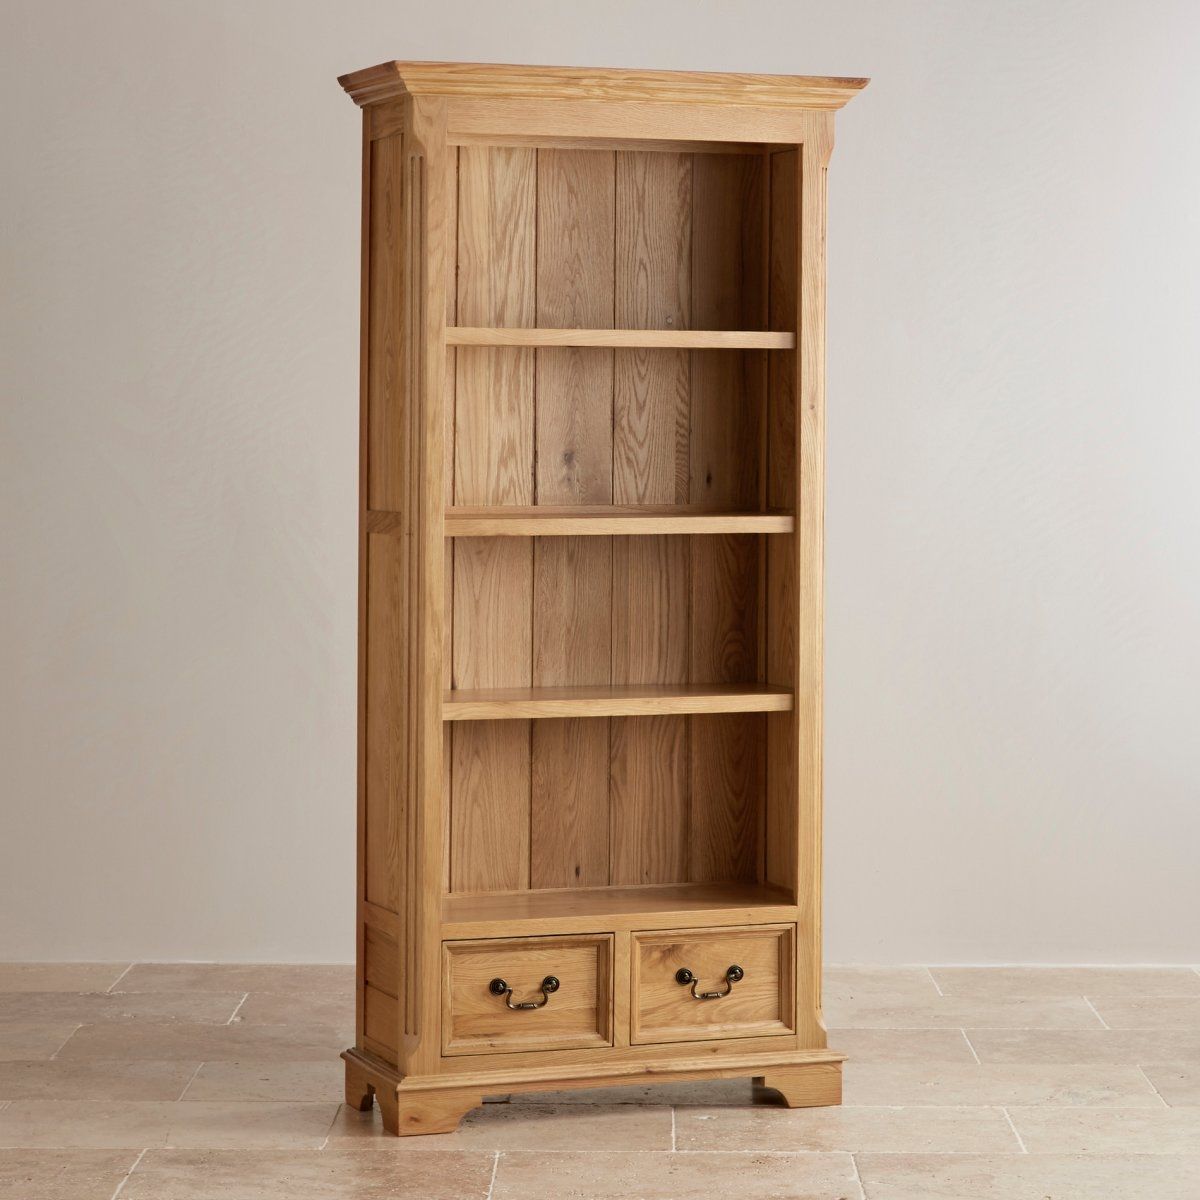 Bookcases Function And Style Oak Furniture Land Intended For Oak Bookshelves (View 9 of 15)